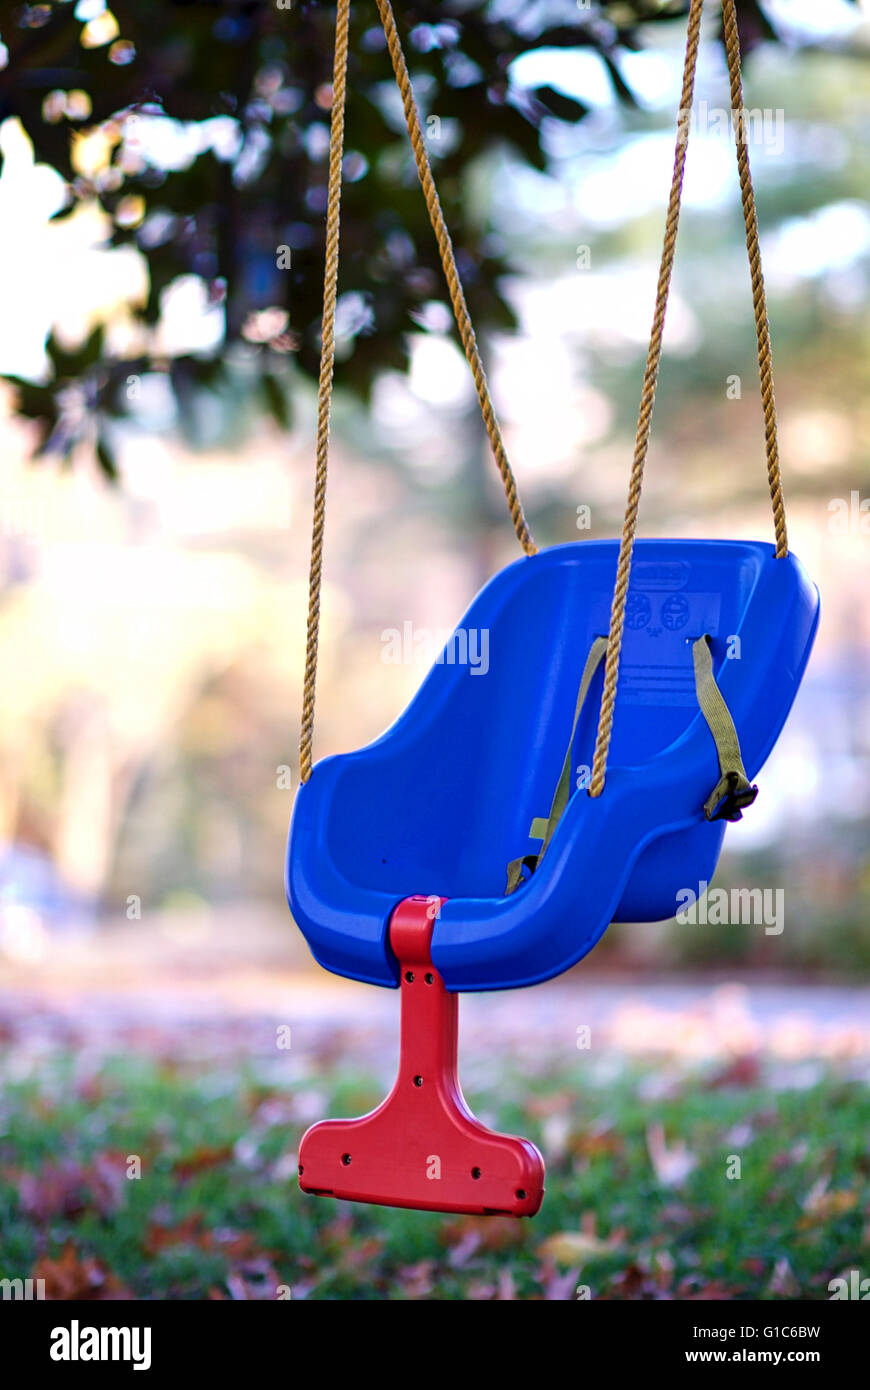 Blue child's swing hanging from a tree limb with selective focus on the foreground in a residential setting. Stock Photo